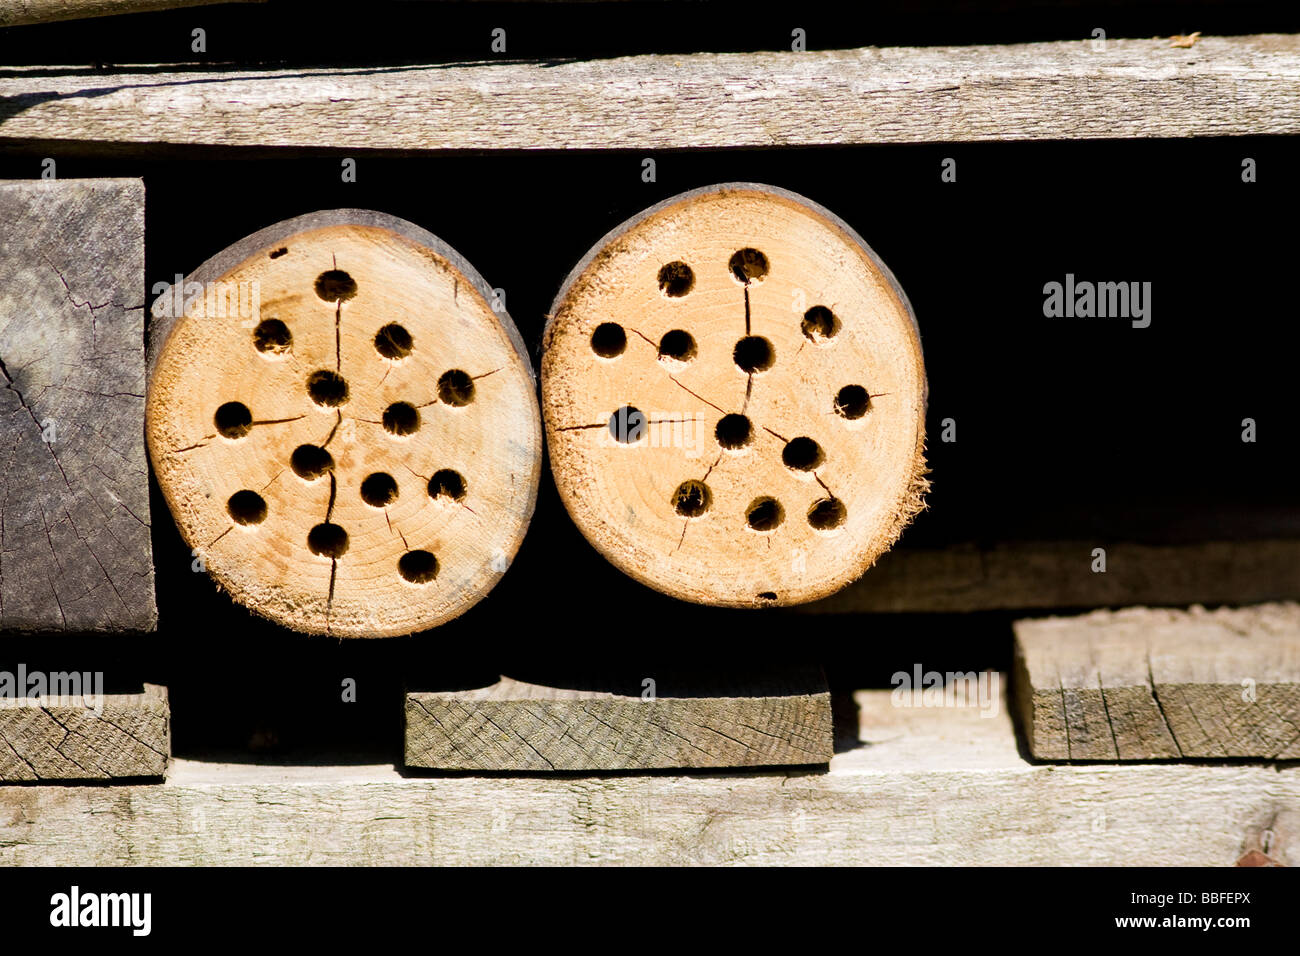 Logs with holes drilled in them as part of an insect refuge Kent UK Stock Photo